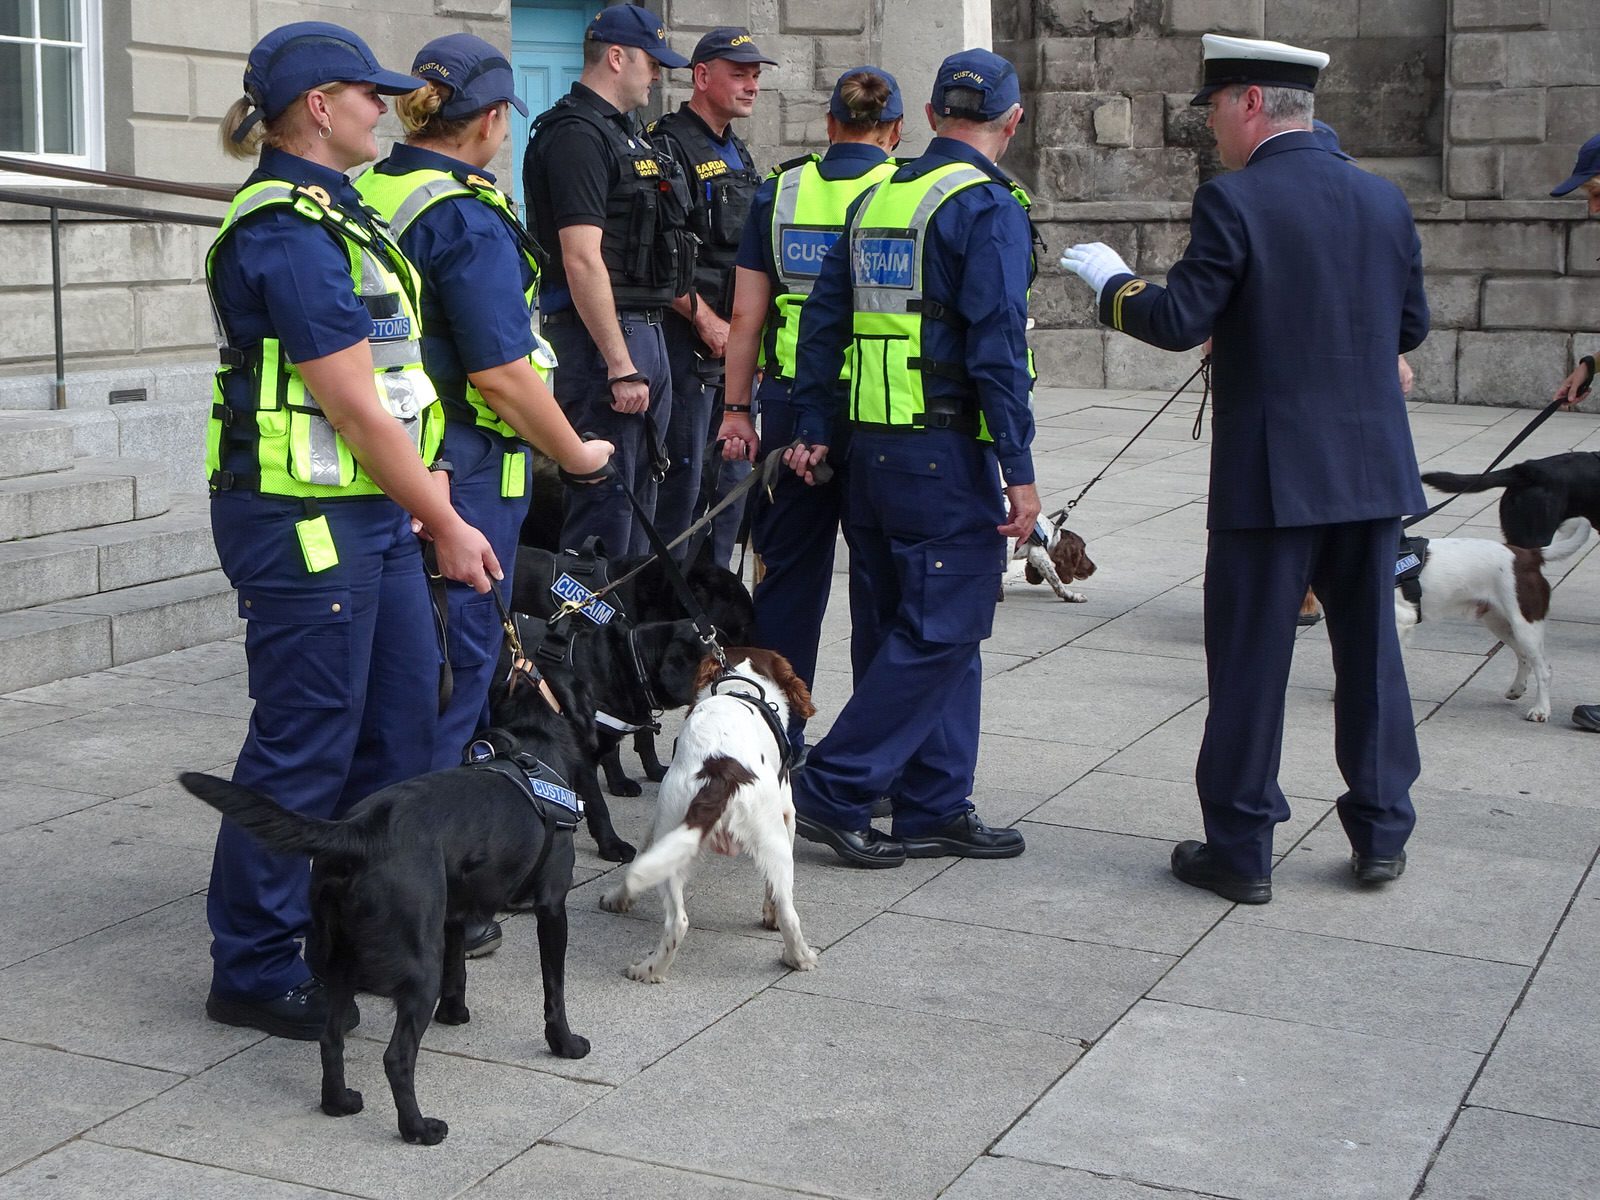 THE DOGS WHO WORK FOR THE IRISH CUSTOMS SERVICE [INVITED THE PRESS TO A PHOTO-SHOOT]-225743-1